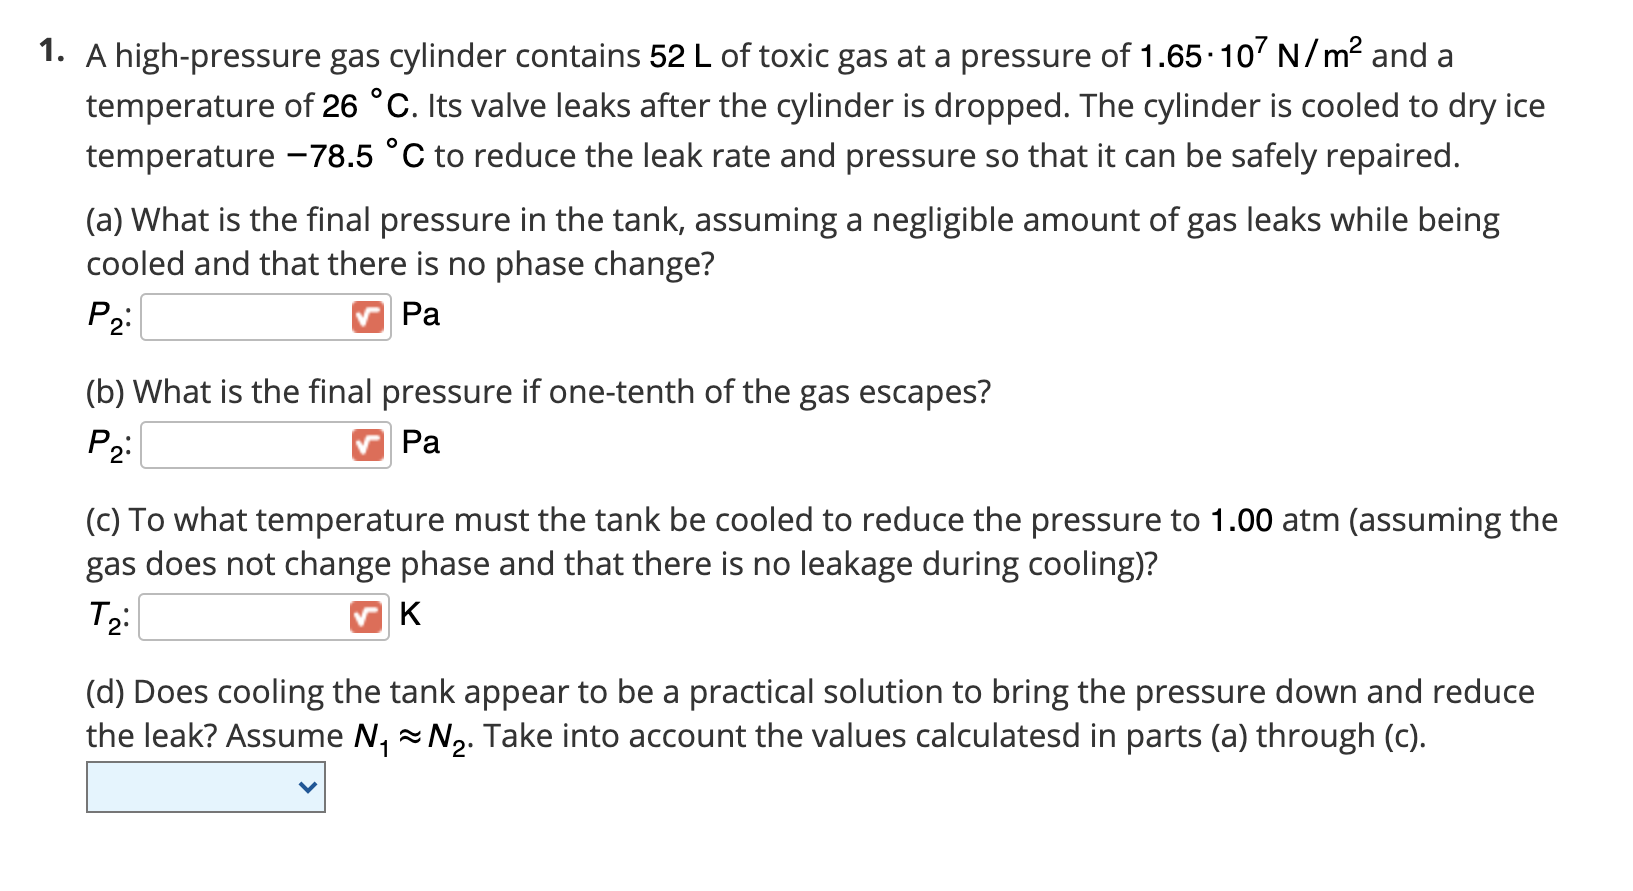 A high-pressure gas cylinder contains 52 L of toxic gas at a pressure of 1.65.10' N/m² and a
temperature of 26 °C. Its valve leaks after the cylinder is dropped. The cylinder is cooled to dry ice
temperature –78.5 °C to reduce the leak rate and pressure so that it can be safely repaired.
(a) What is the final pressure in the tank, assuming a negligible amount of gas leaks while being
cooled and that there is no phase change?
P2:
Ра
(b) What is the final pressure if one-tenth of the gas escapes?
P2
Ра
(c) To what temperature must the tank be cooled to reduce the pressure to 1.00 atm (assuming the
gas does not change phase and that there is no leakage during cooling)?
(d) Does cooling the tank appear to be a practical solution to bring the pressure down and reduce
the leak? Assume N, N2. Take into account the values calculatesd in parts (a) through (c).
